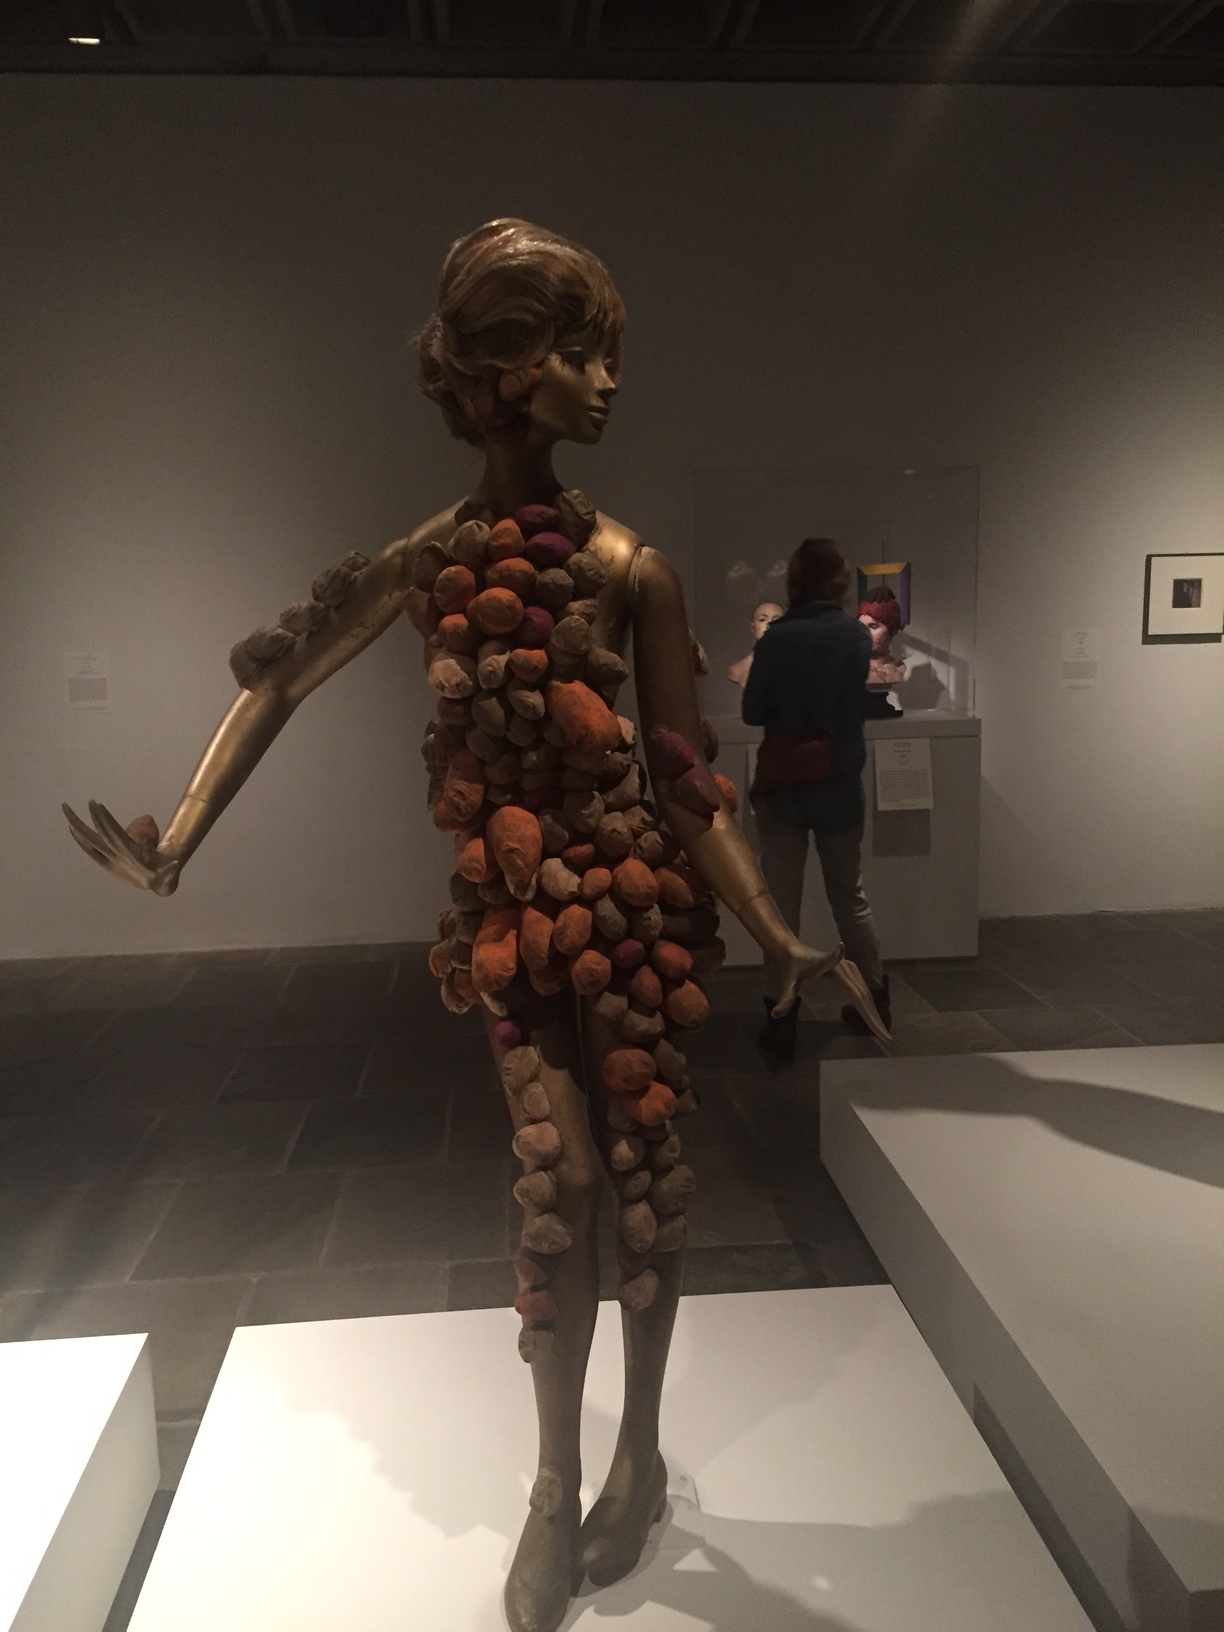 Dorothea Tanning opens eyes and doors at the Tate Modern — CultureZohn